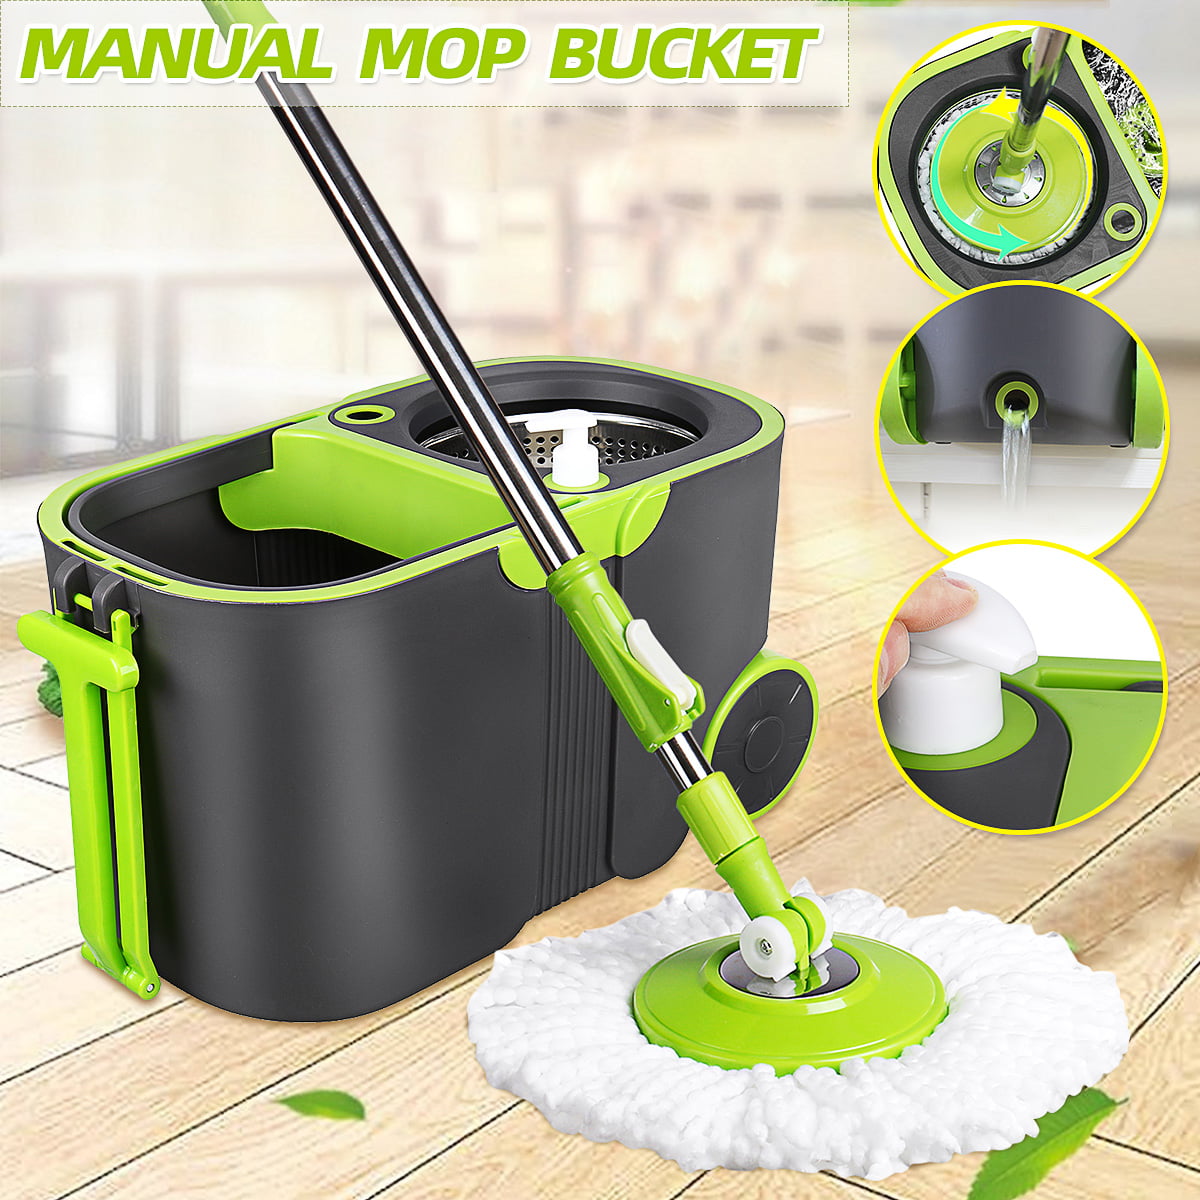 Microfiber 360 Spin Mop and Bucket Floor Cleaning Tools Stainless Steel Deluxe 